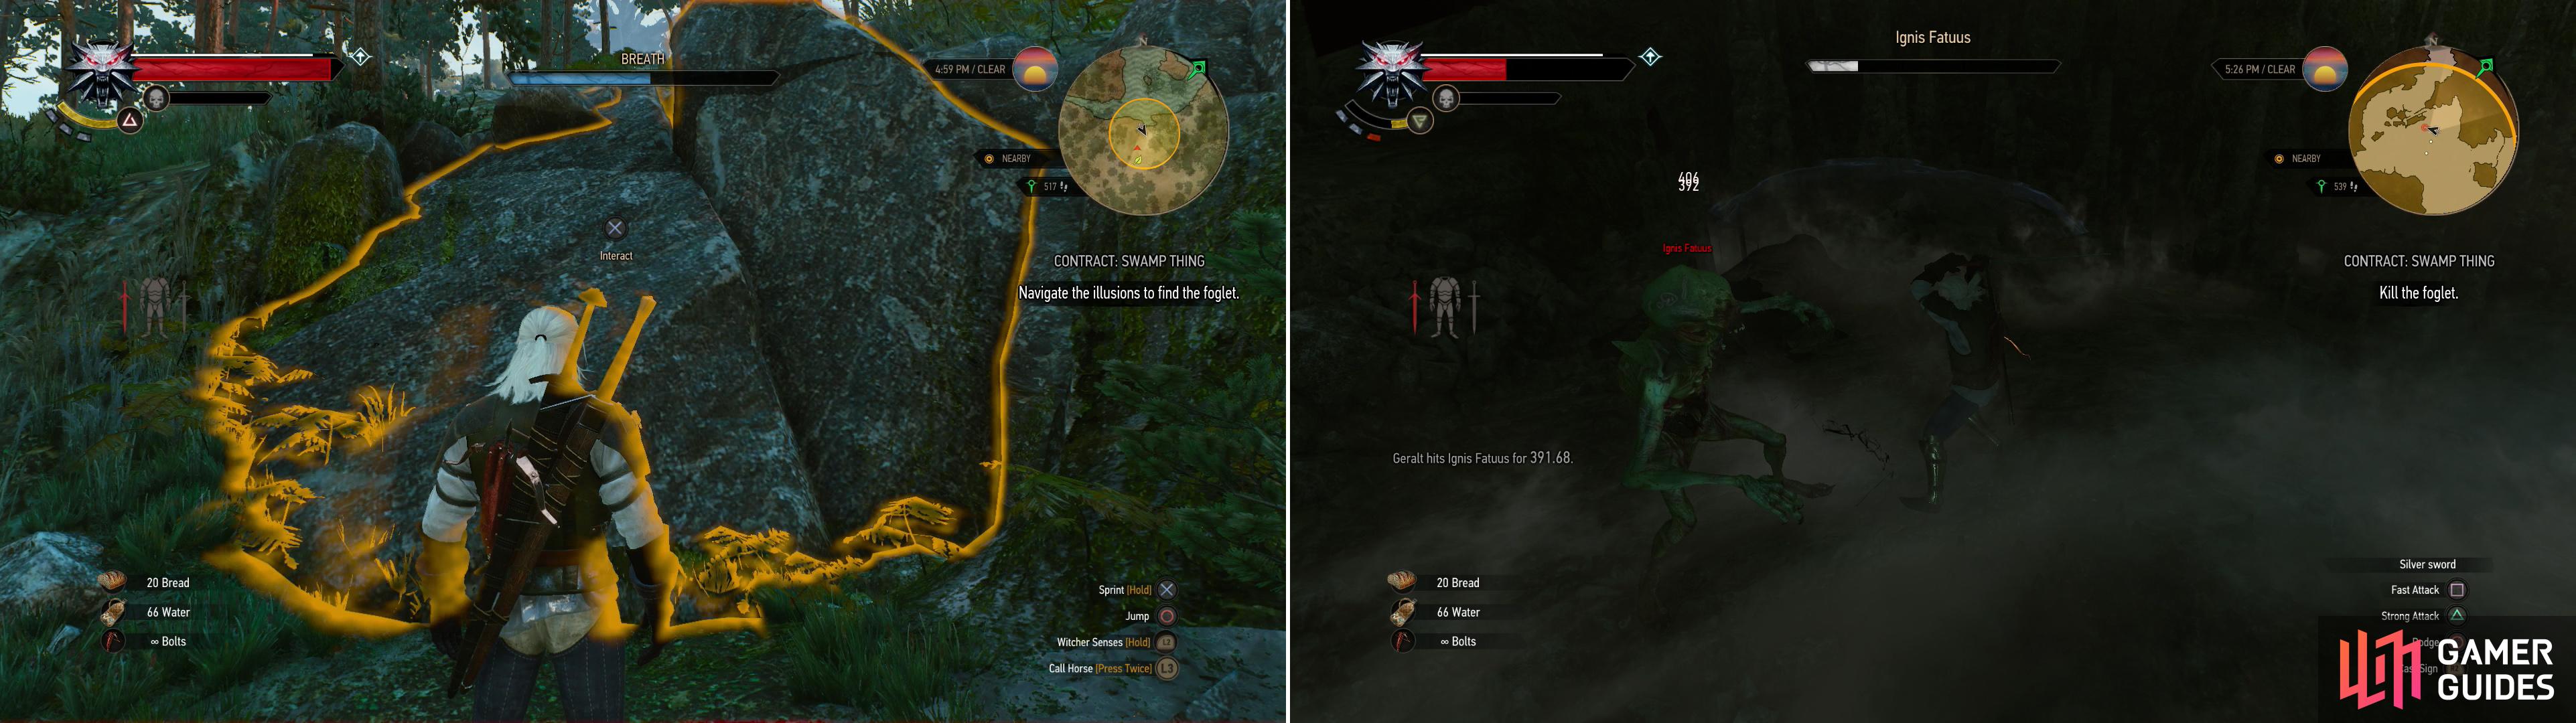 After finding the Foglet’s lair, use the Eye of Neheleri to gain access (left) then slay Ignis Fatuus (right).